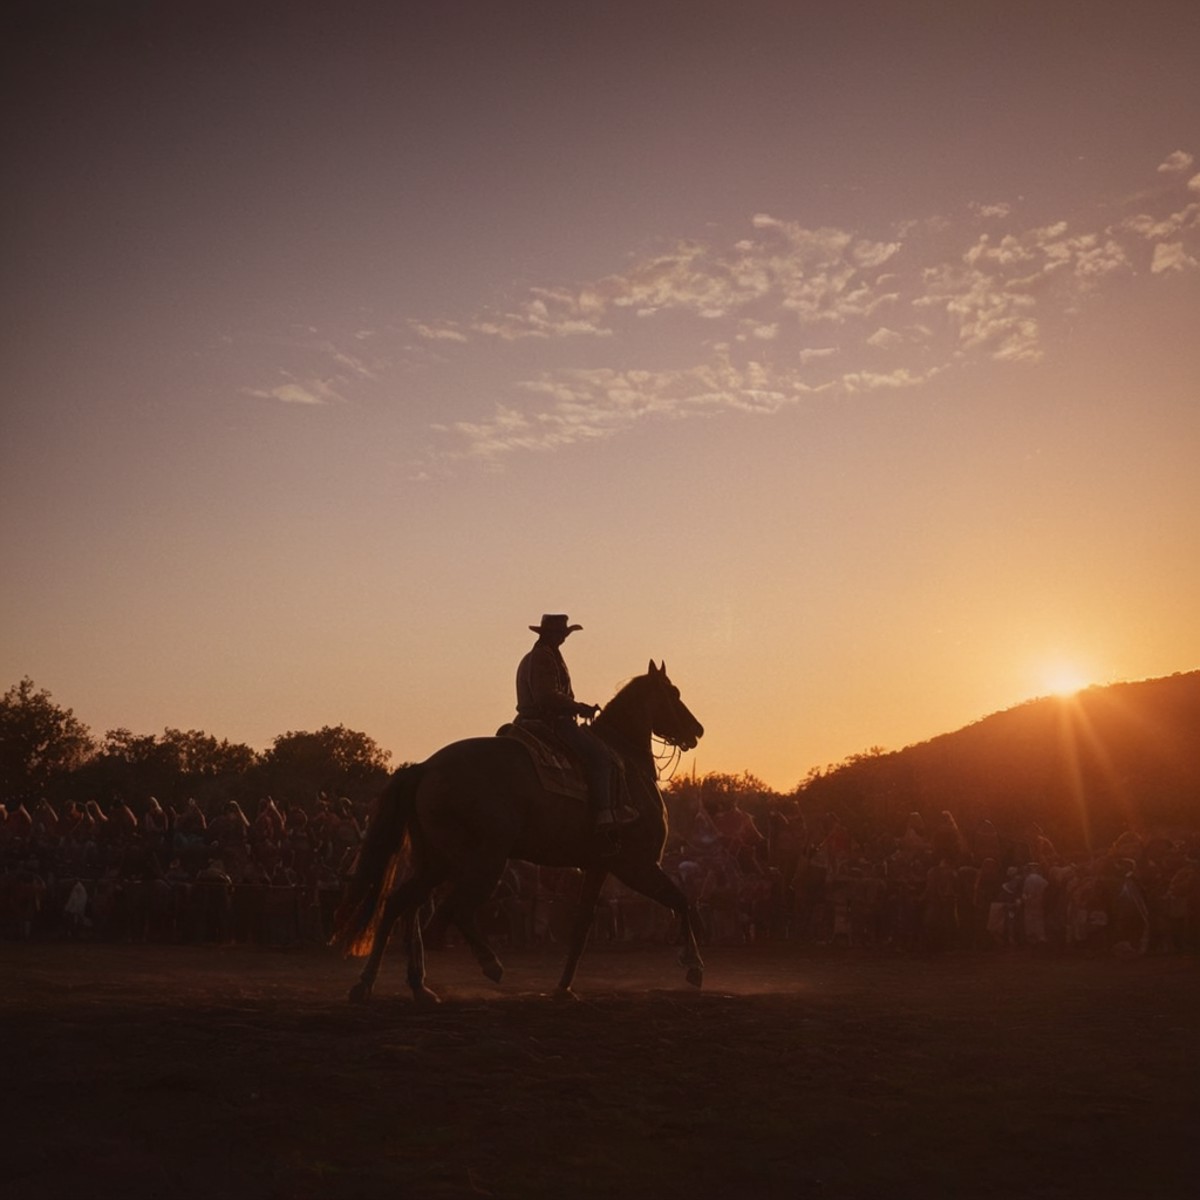 cinematic film still of  <lora:Warm Lighting Style:1>
warm light,a cowboy man riding a horse in front of a crowd of people...